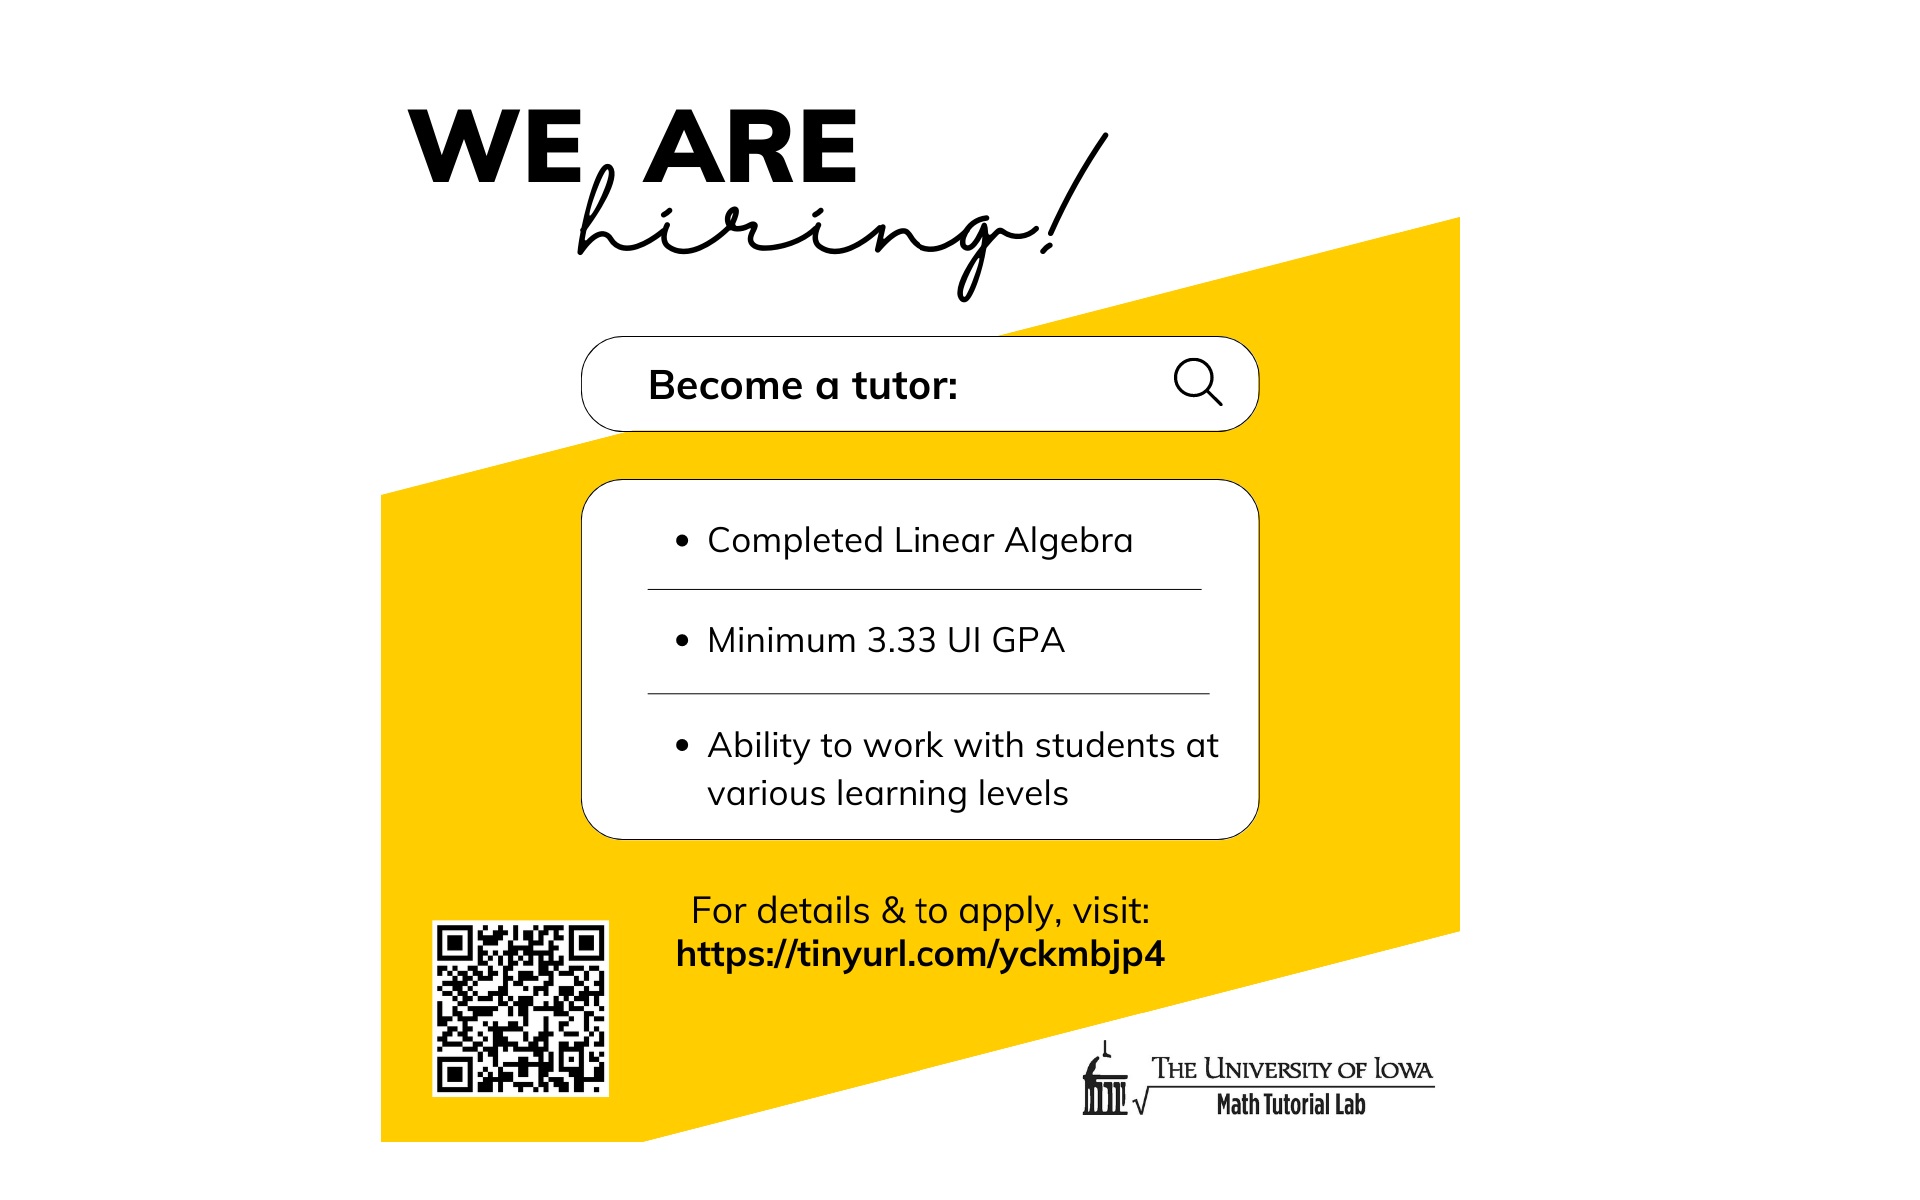 We are hiring! become a tutor: completed linear algebra minimum 3.33 UI GPA ability to work with students at various learning levels For details & to apply, visit htttp://tinyurl.com/yckmbjp4